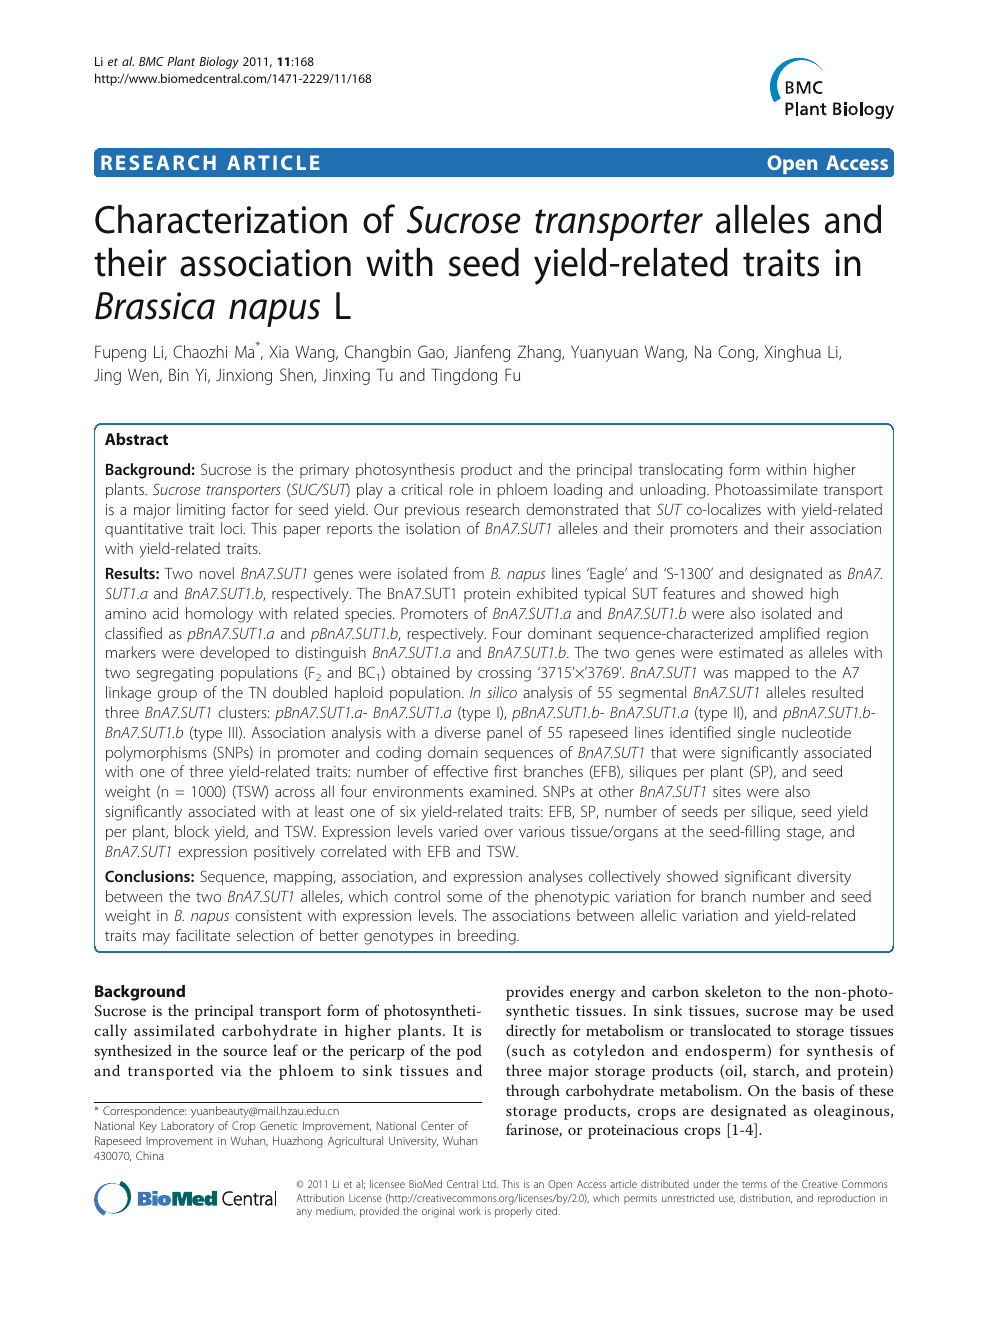 Characterization Of Sucrose Transporter Alleles And Their Association With Seed Yield Related Traits In Brassica Napus L Topic Of Research Paper In Biological Sciences Download Scholarly Article Pdf And Read For Free